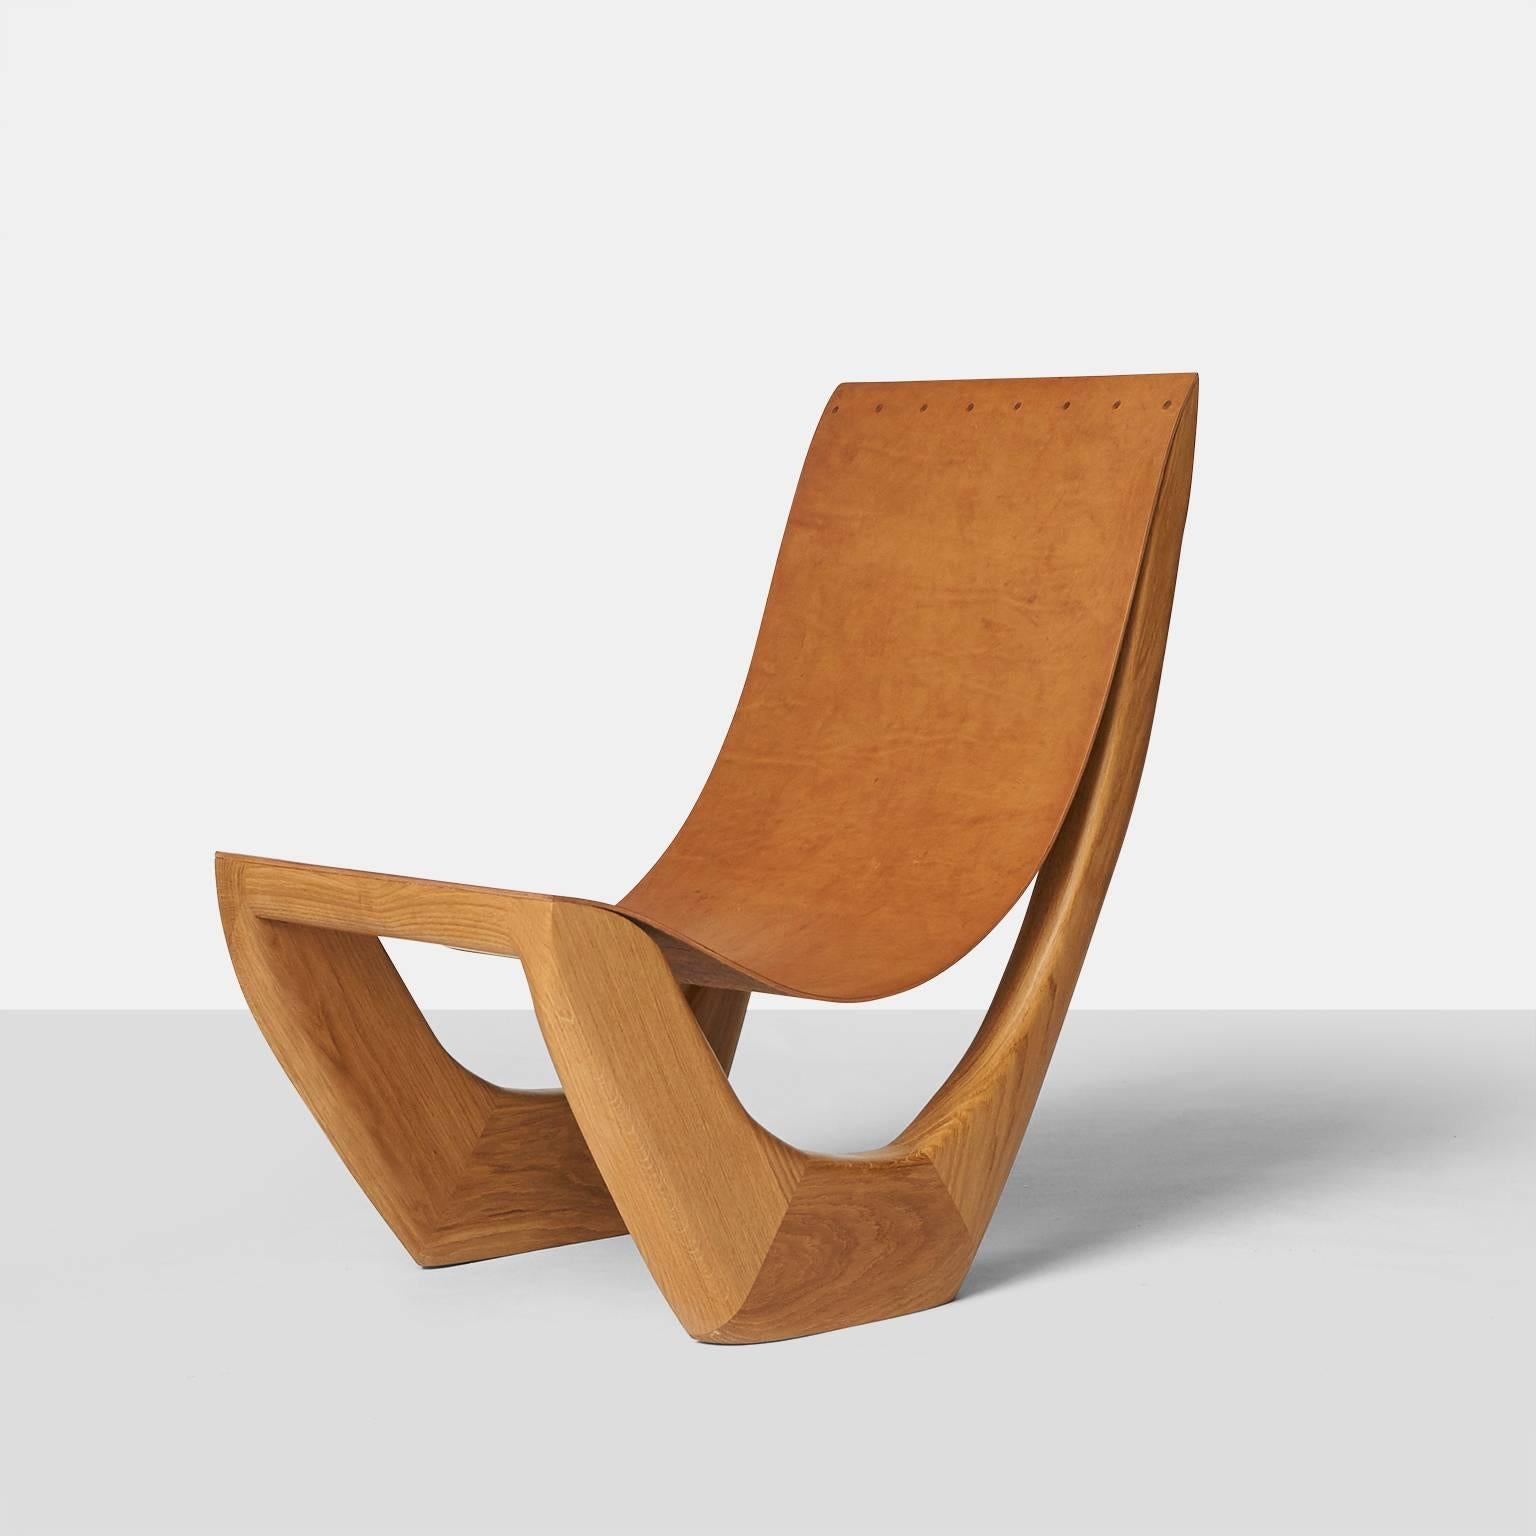 A lounge chair made of naturally fallen oak with a solid leather strap. Almond & Company is the exclusive gallery in the U.S. to represent this artist.